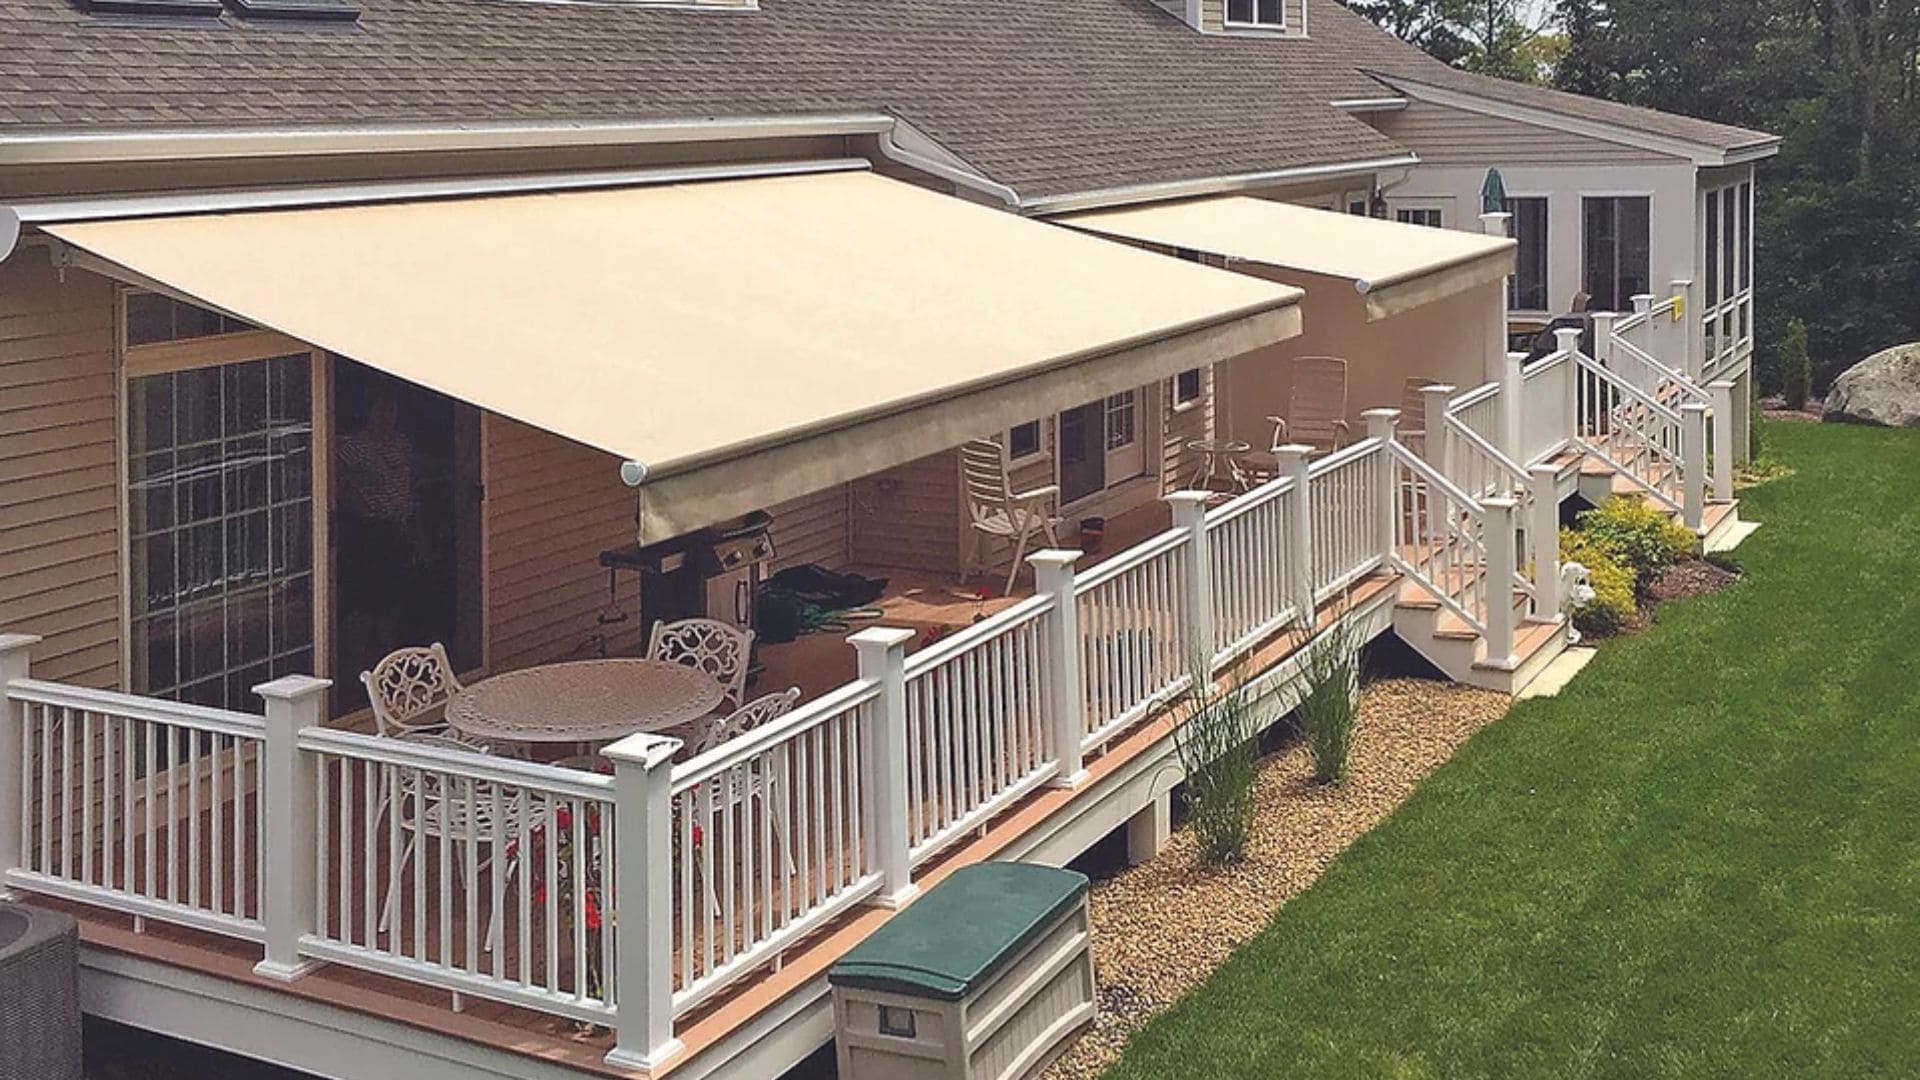 Best Shade Options for Your Patio & Deck in 2022